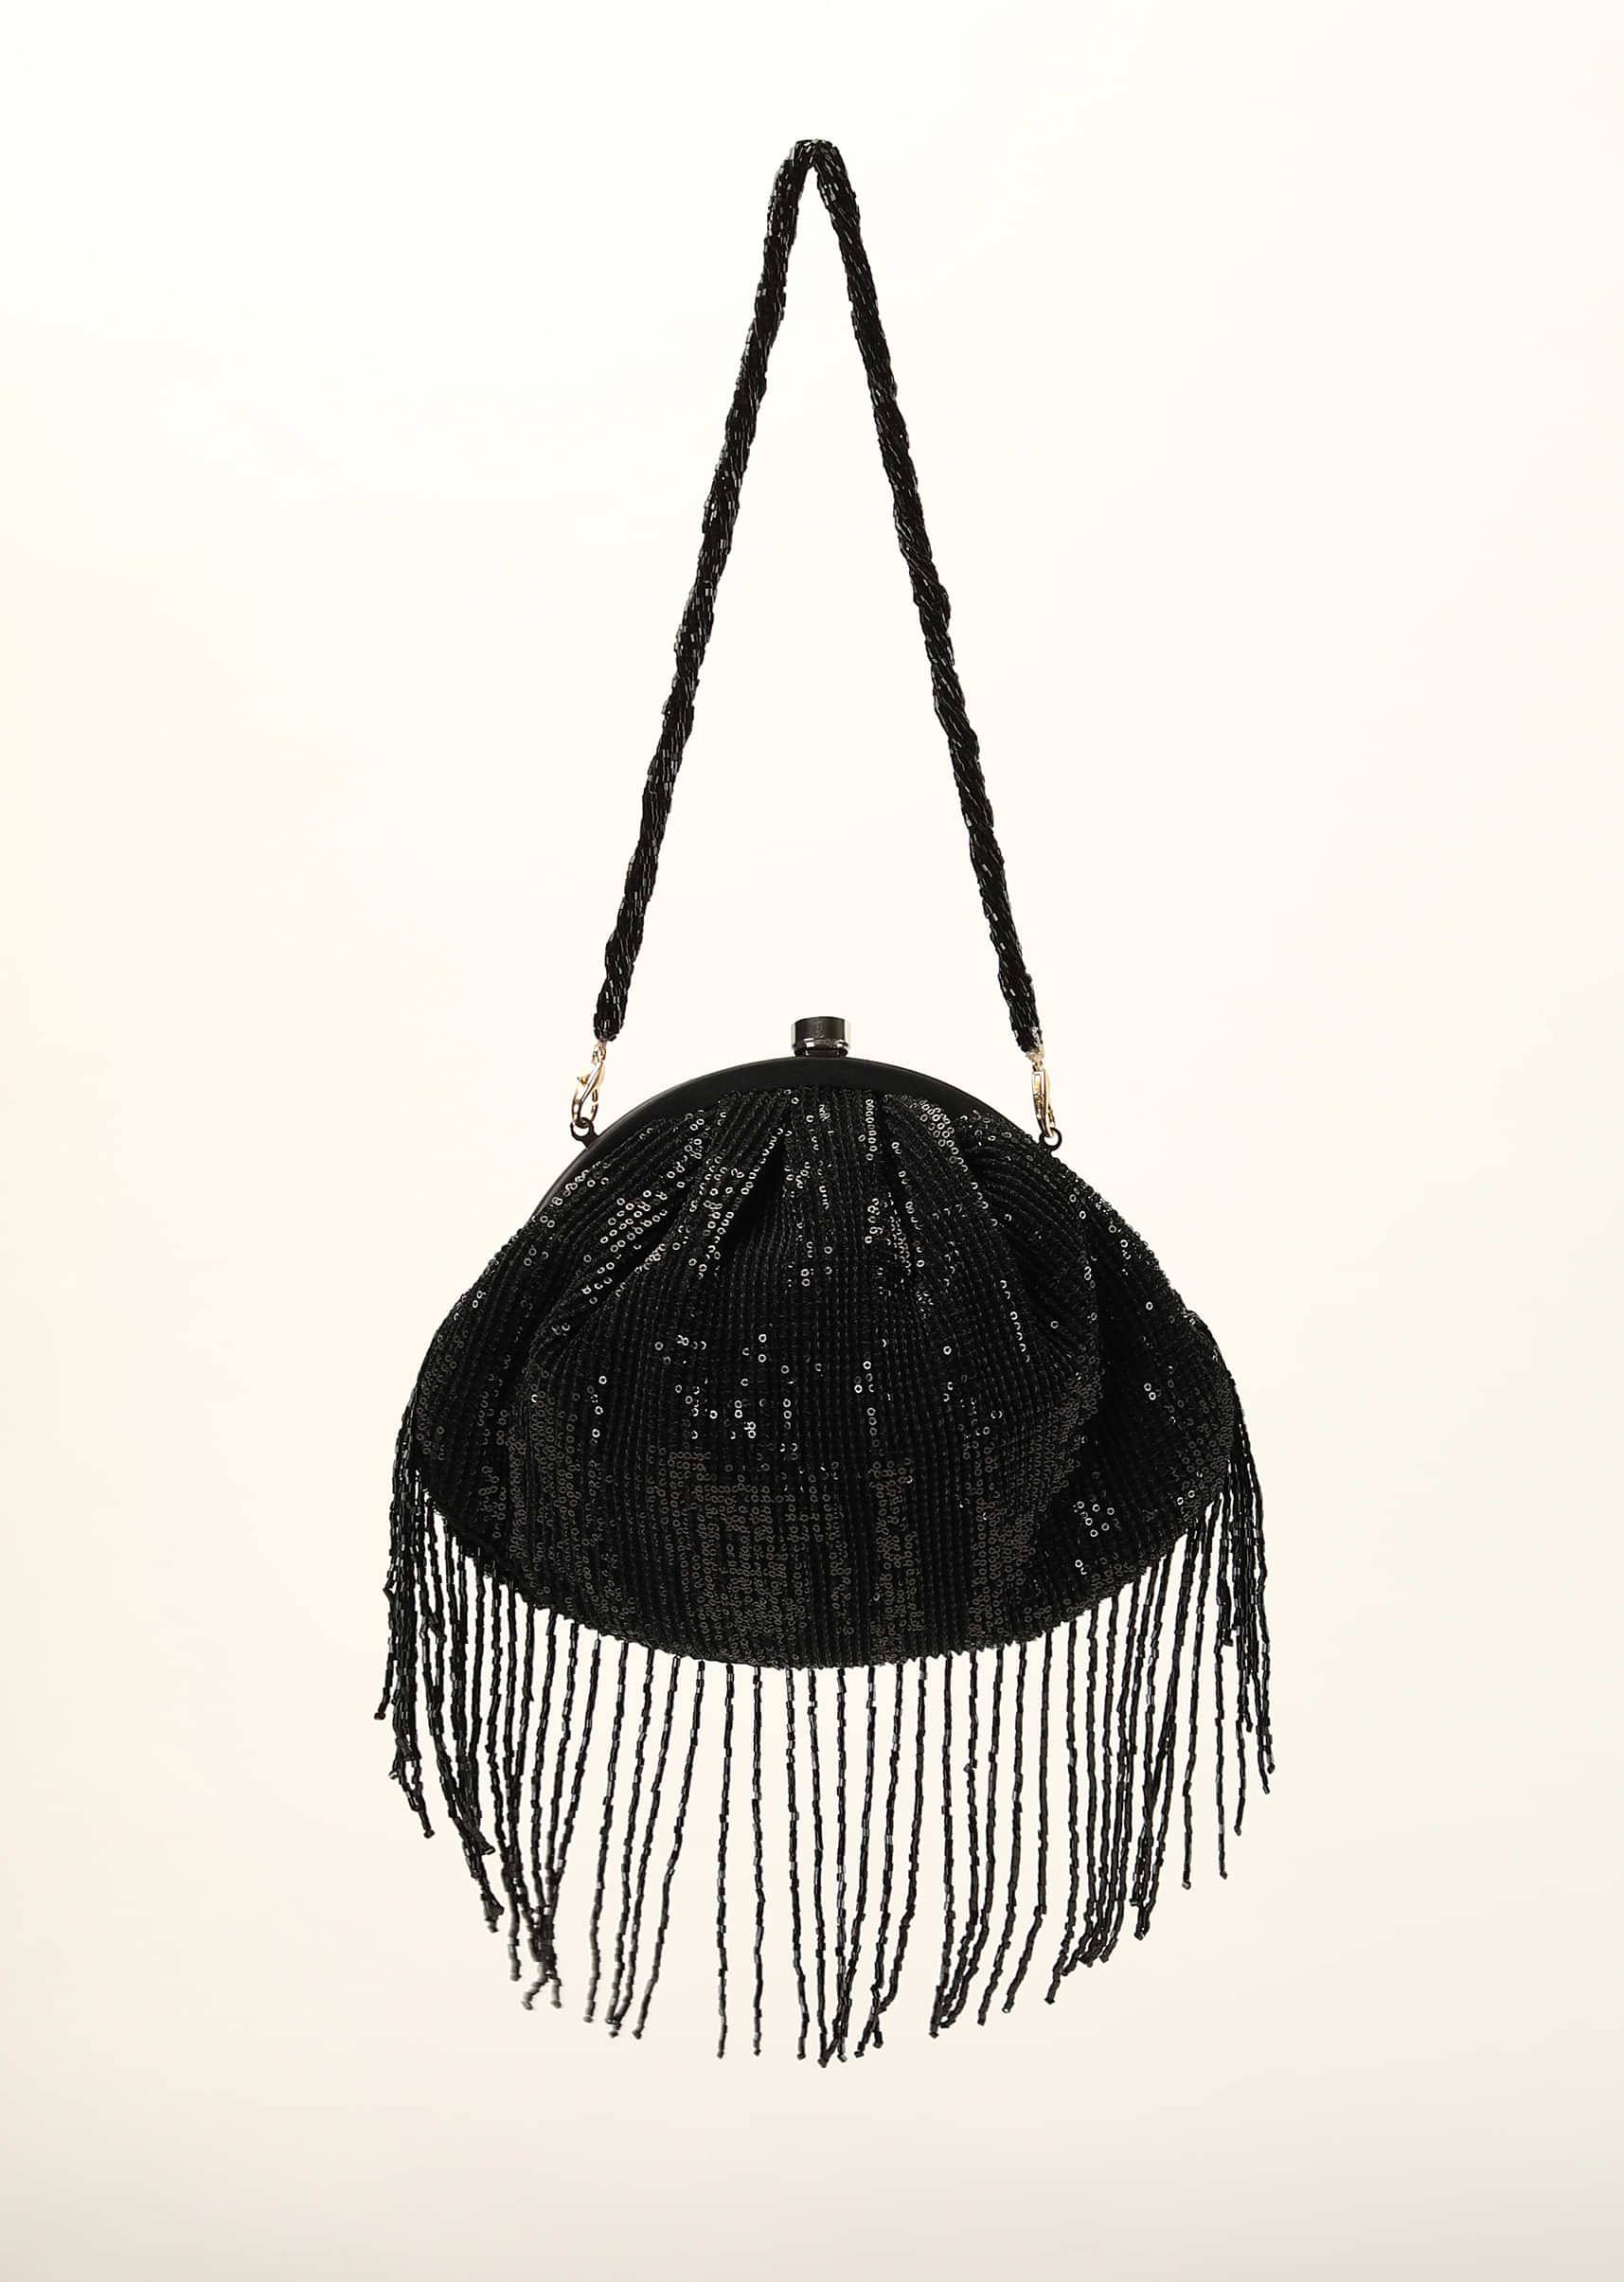 Black Clutch In Crushed Sequins Fabric With Cut Dana Fringes On The Edges